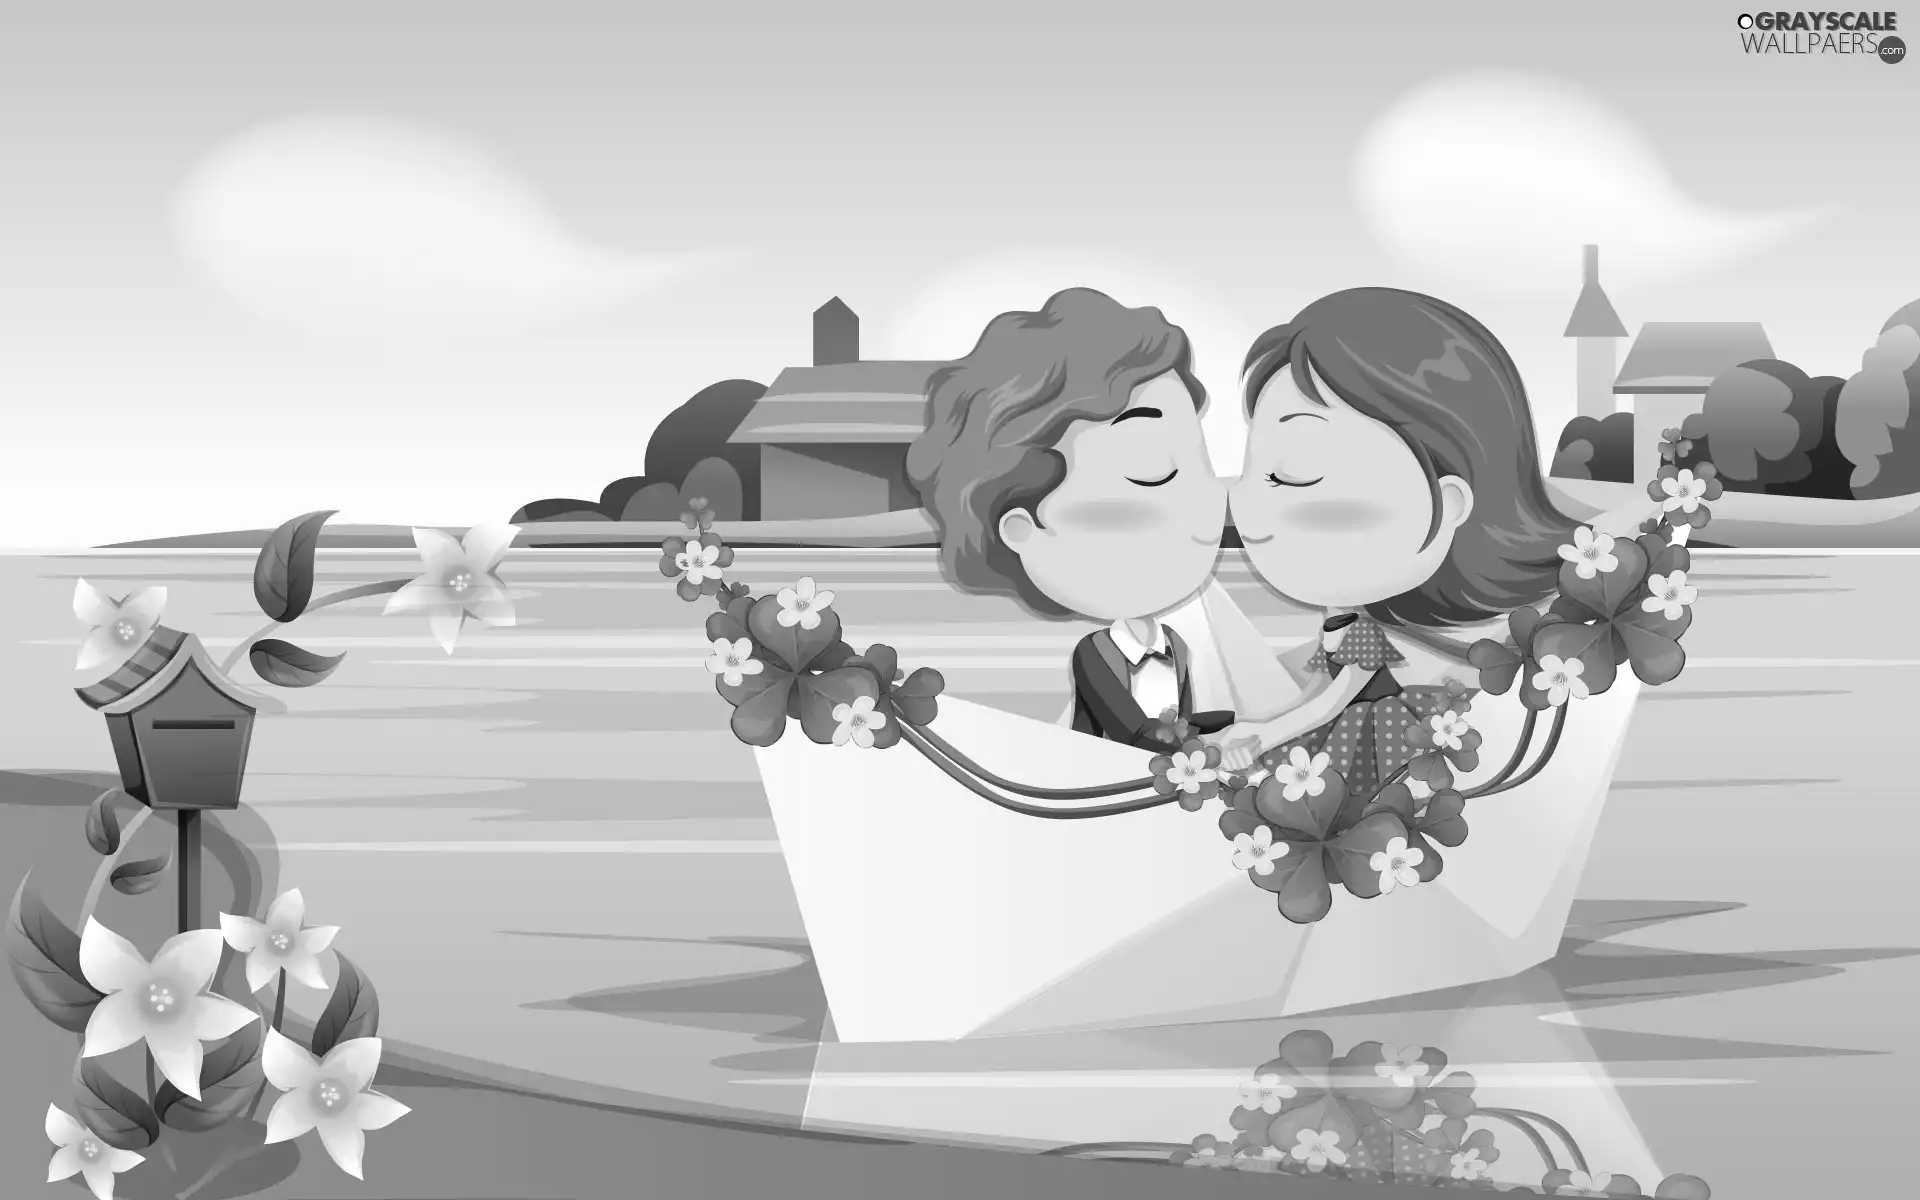 lake, 2D, lovers, Boat, Steam